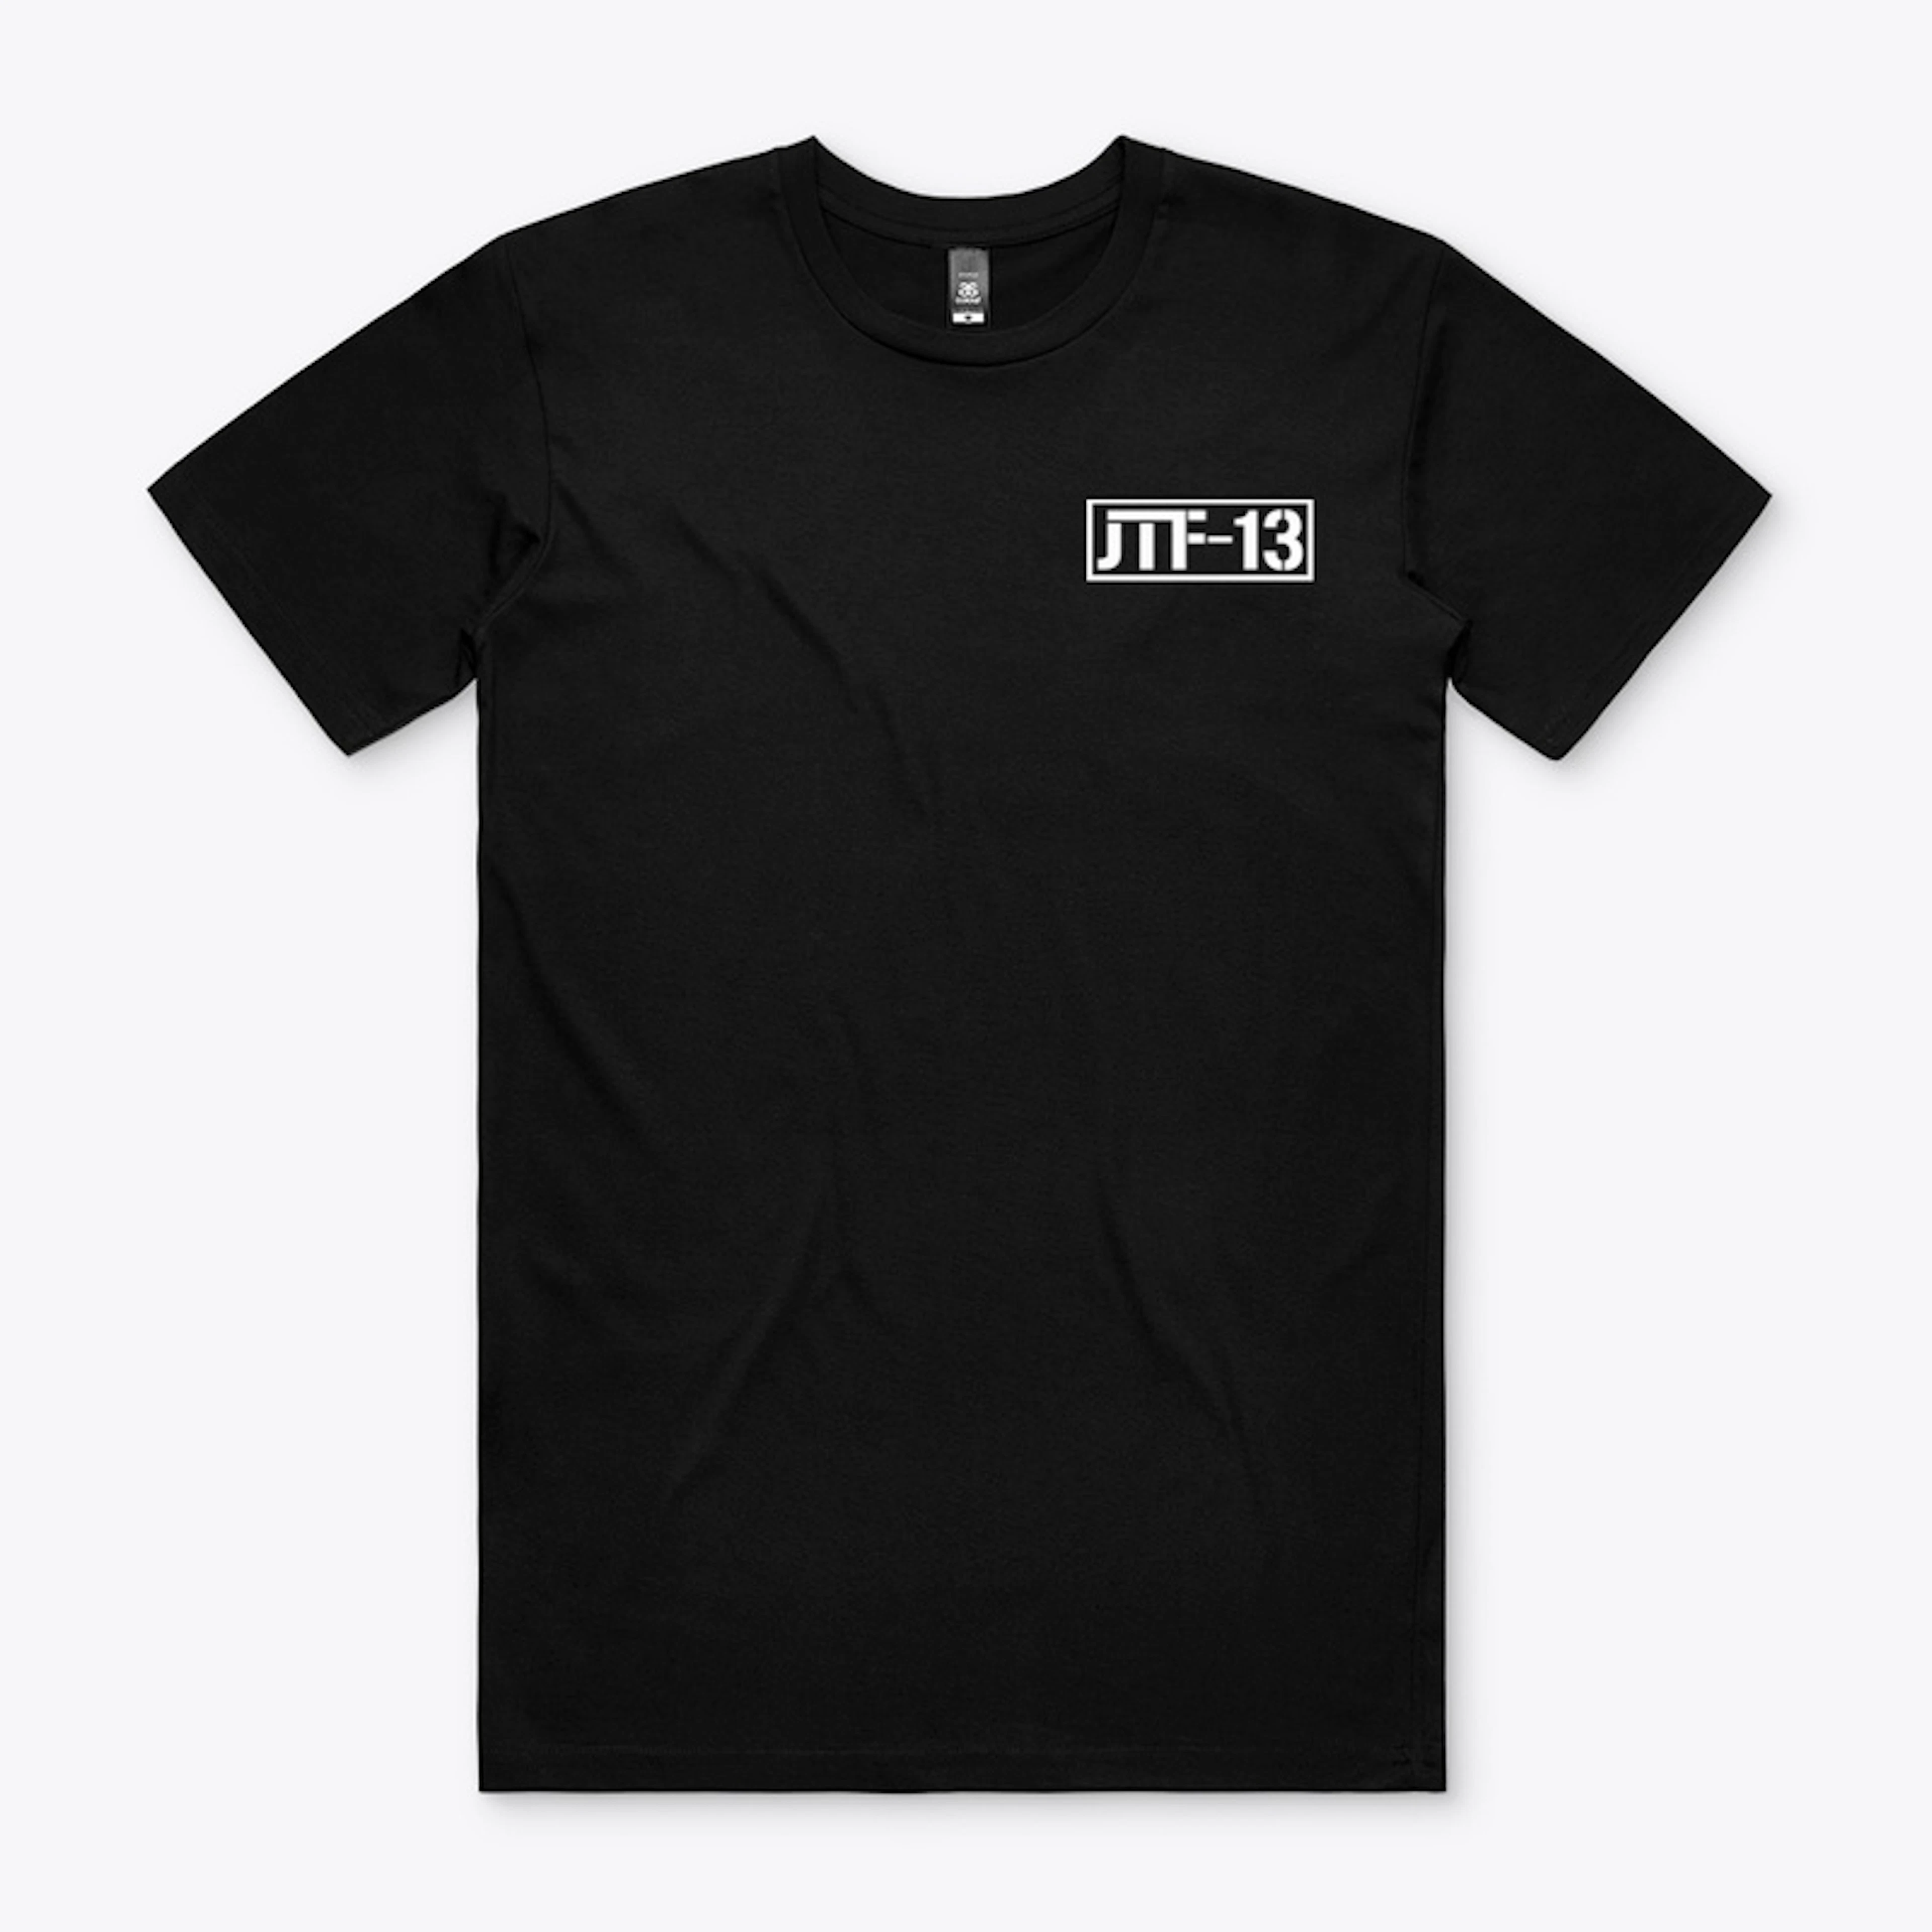 Black T-Shirt with JTF-13 Brand and Logo